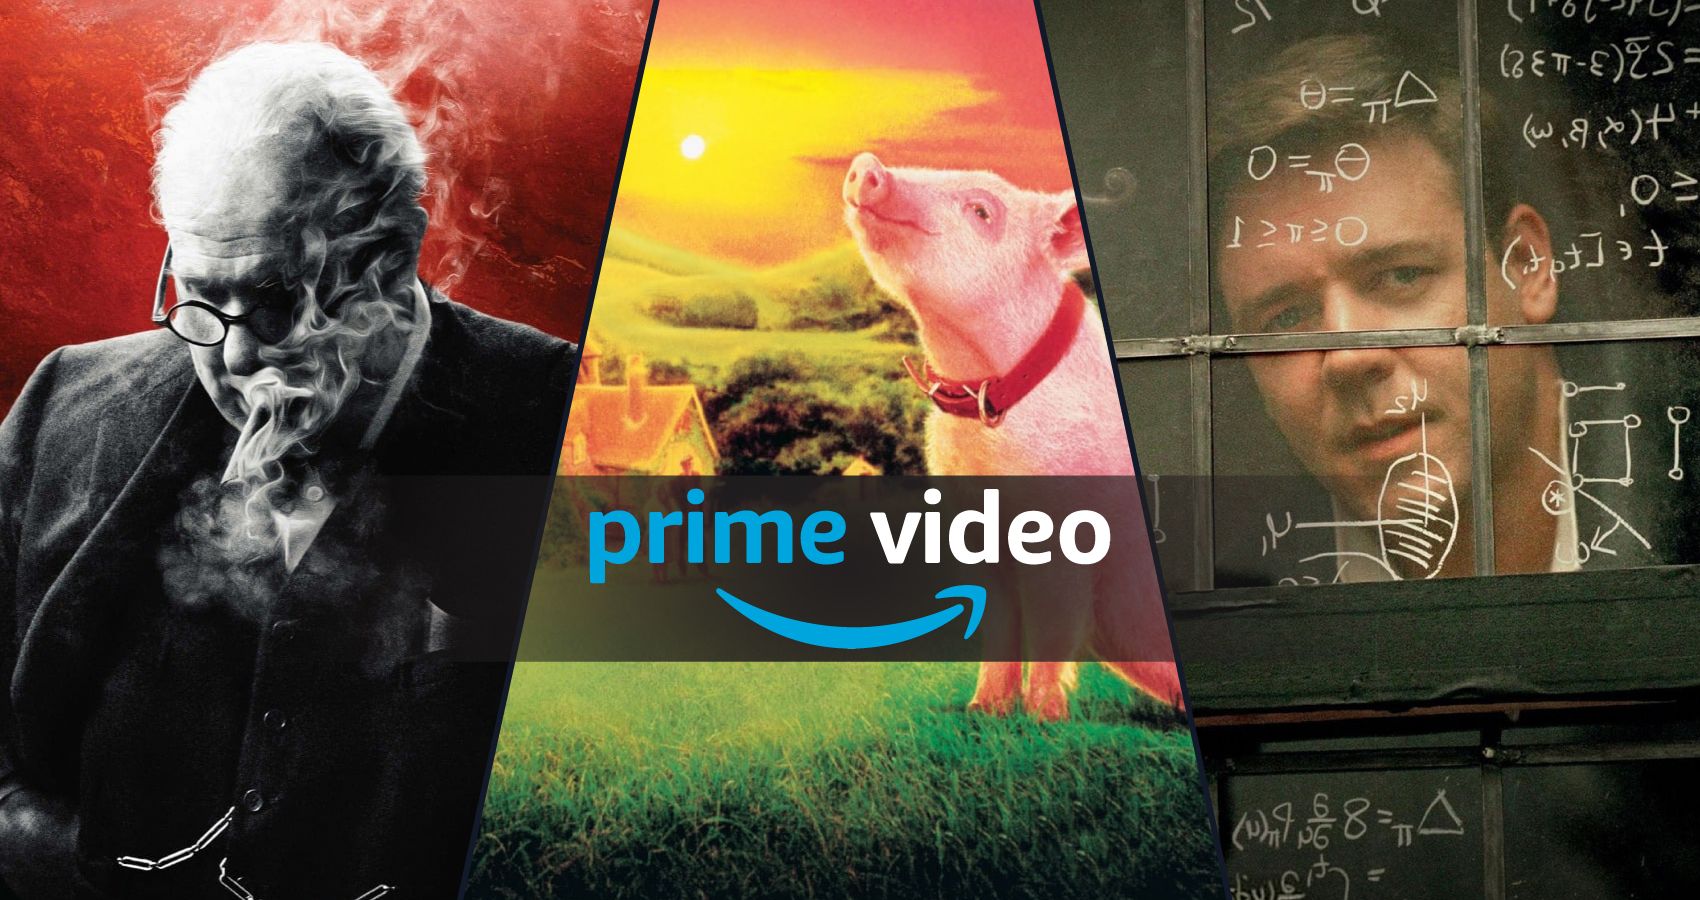 best movies coming to prime video may 2023 Babe, A Beautiful Mind, Darkest Hour